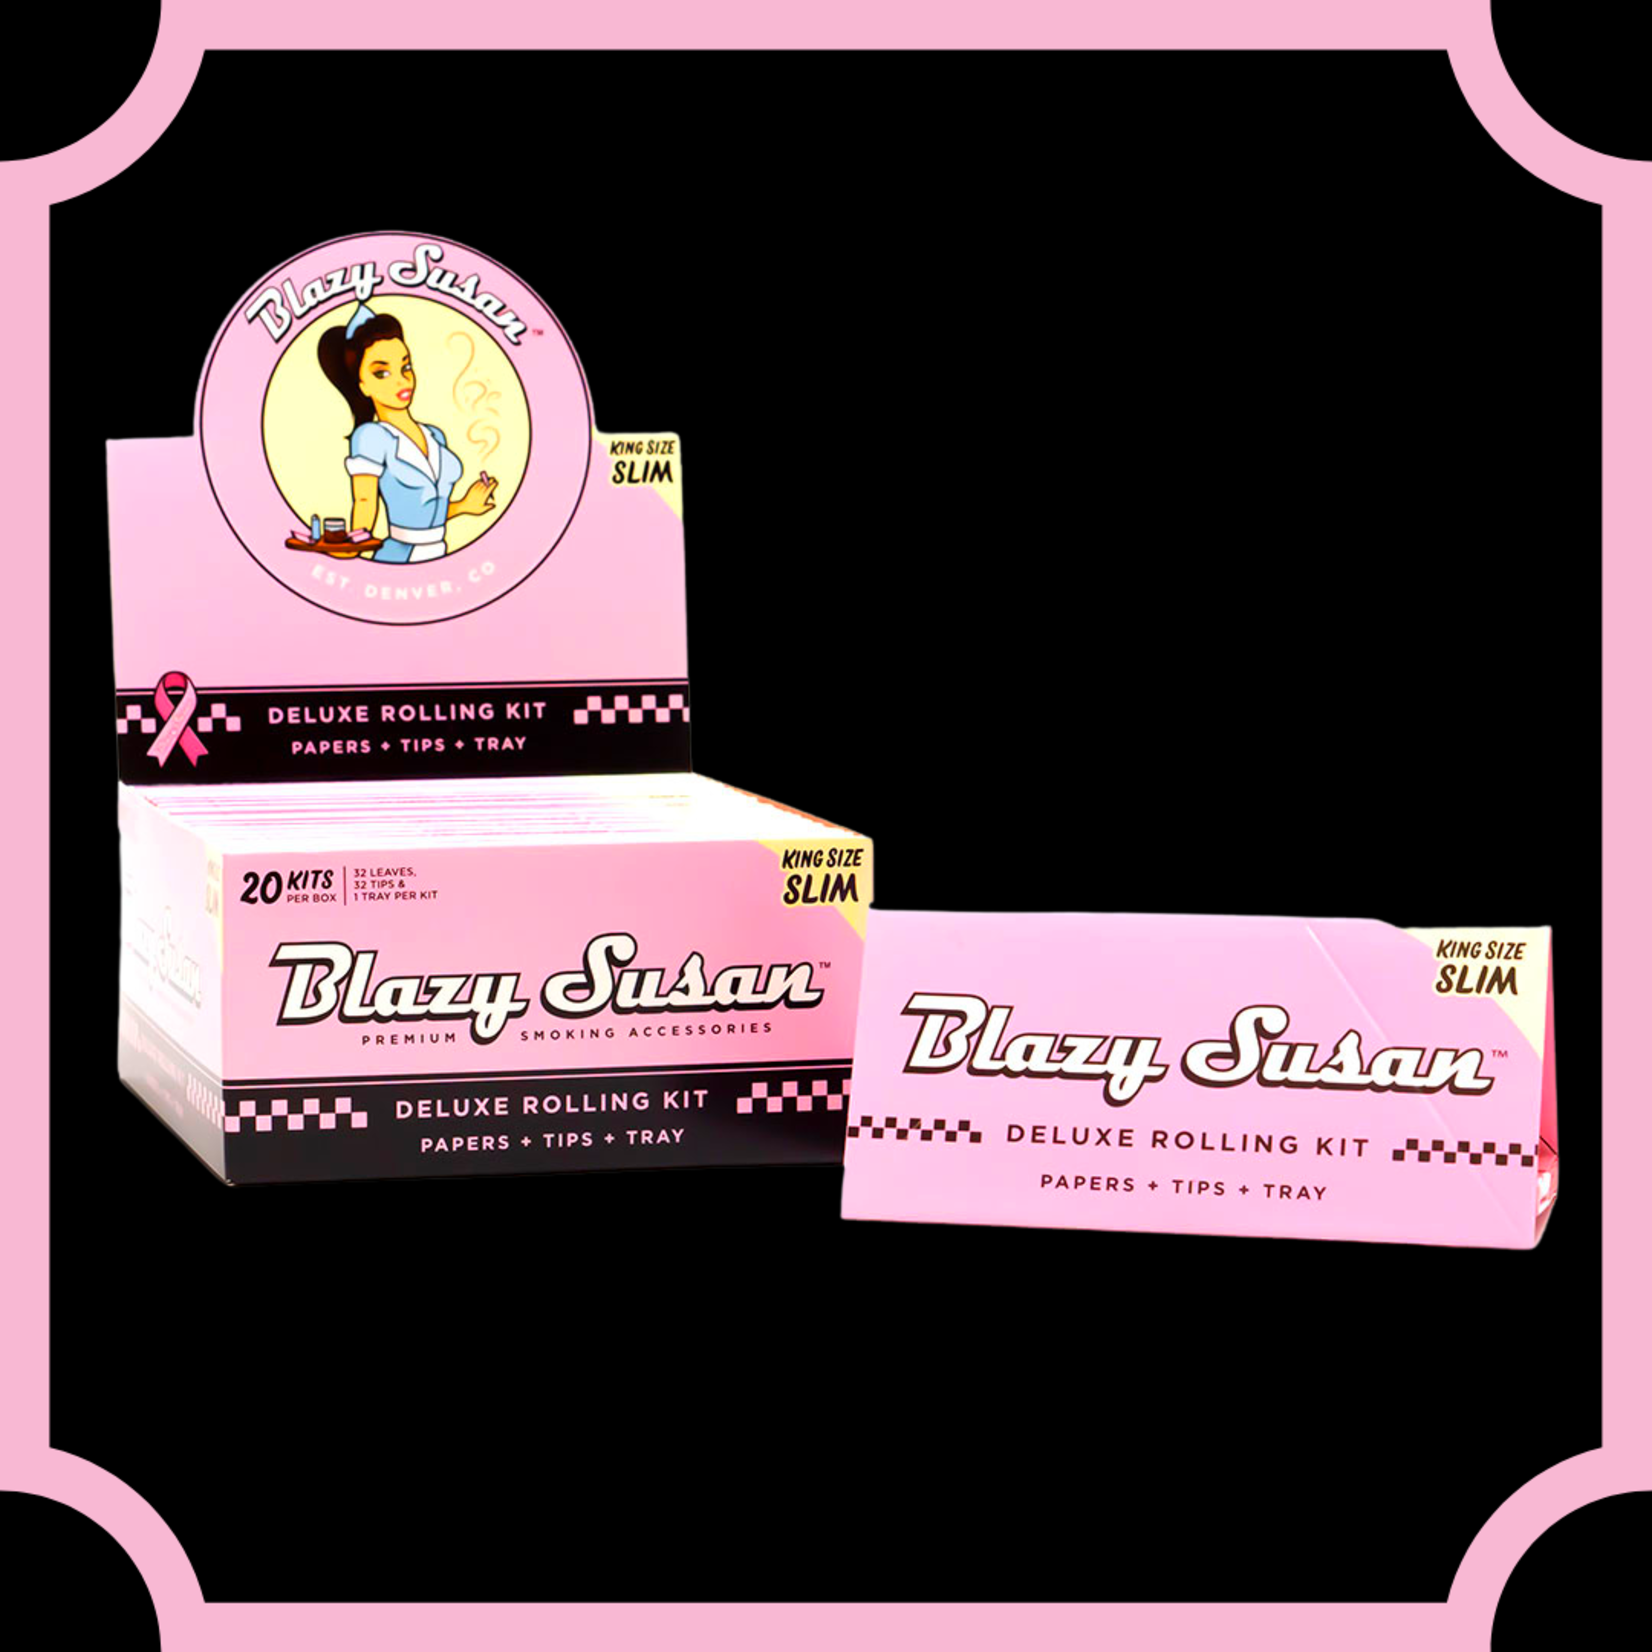 Blazy Susan Deluxe Rolling Kit: Papers + Tips + Tray - King Size Slim 